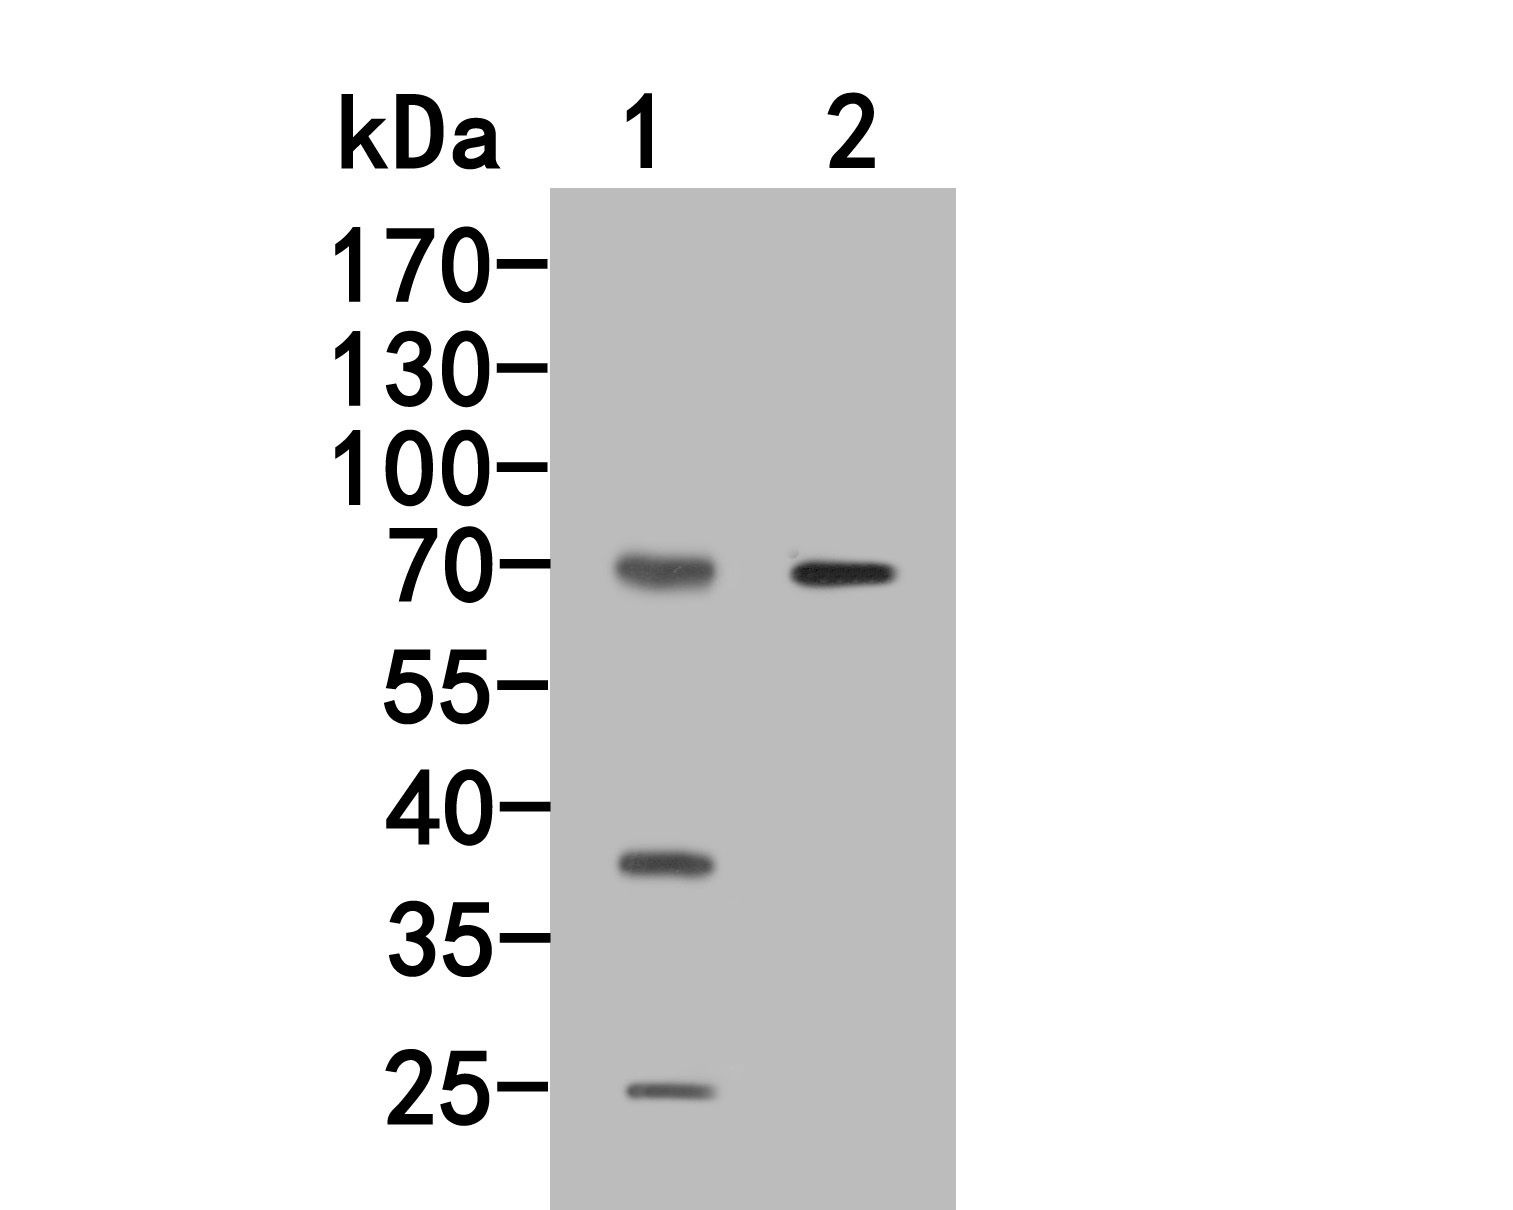 Western blot analysis of 2B4 on different lysates. Proteins were transferred to a PVDF membrane and blocked with 5% NFDM/TBST for 1 hour at room temperature. The primary antibody (HA500263, 1/500) was used in 5% NFDM/TBST at room temperature for 2 hours. Goat Anti-Rabbit IgG - HRP Secondary Antibody (HA1001) at 1:5,000 dilution was used for 1 hour at room temperature.<br />
Positive control: <br />
Lane 1: U937 cell lysate<br />
Lane 2: Rat brain tissue lysate